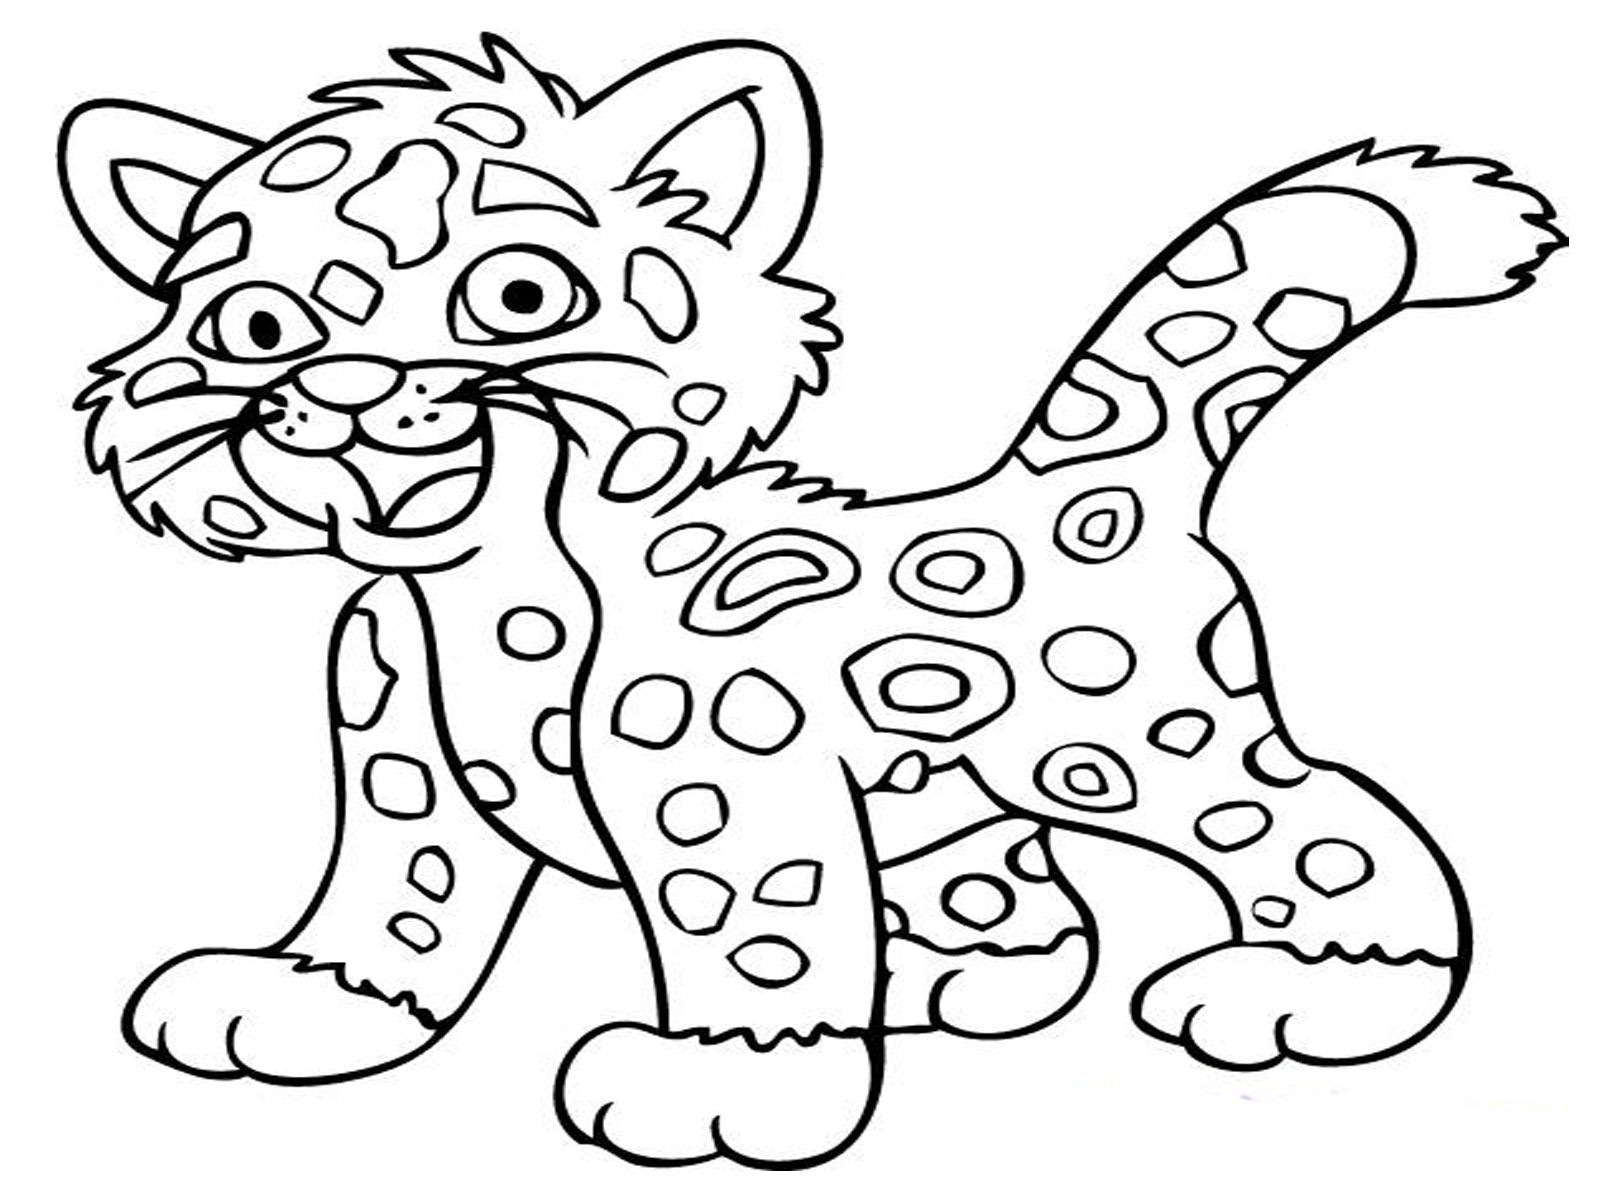 Printable Coloring Pages For Kids Animals
 Animal Coloring Pages 9